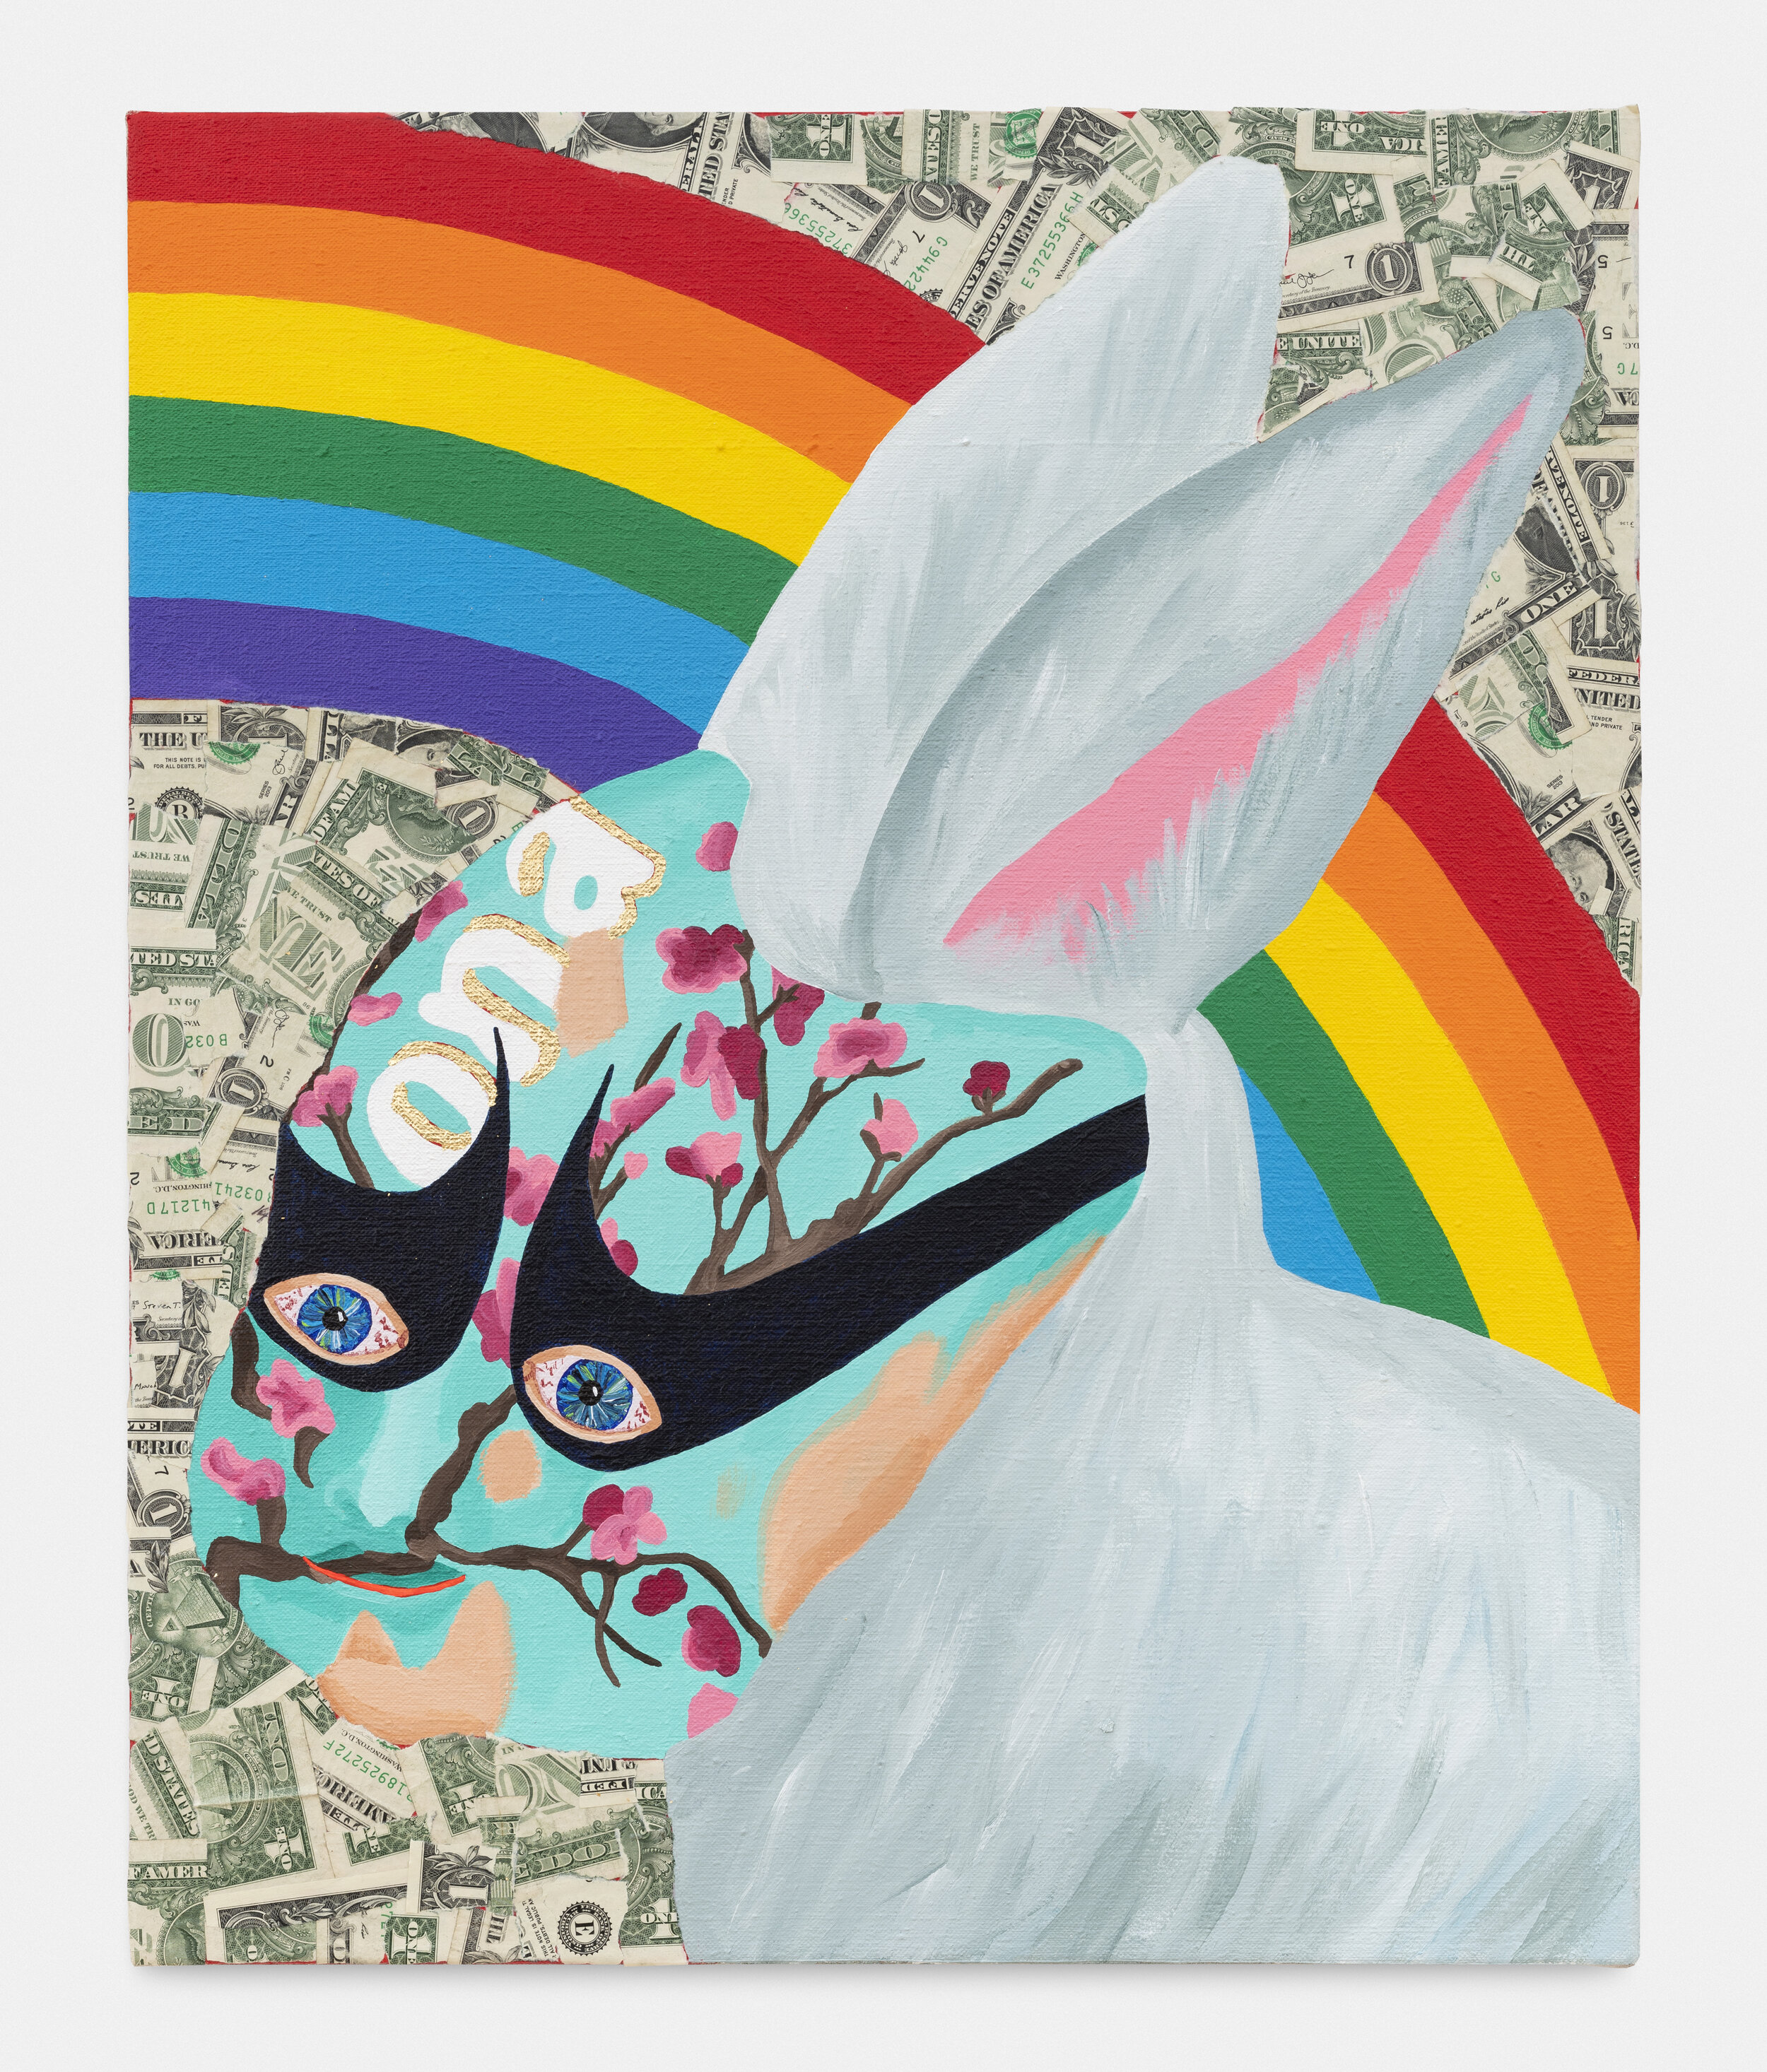   Baby/Bunny with Arizona Iced Tea Face Paint and Nike Eyes , 2020  17 x 21 x 1.5 inches (43.18 x 53.34 x 3.81 cm.)  Acrylic, gold leaf, and dollar bills on linen  Private Collection 